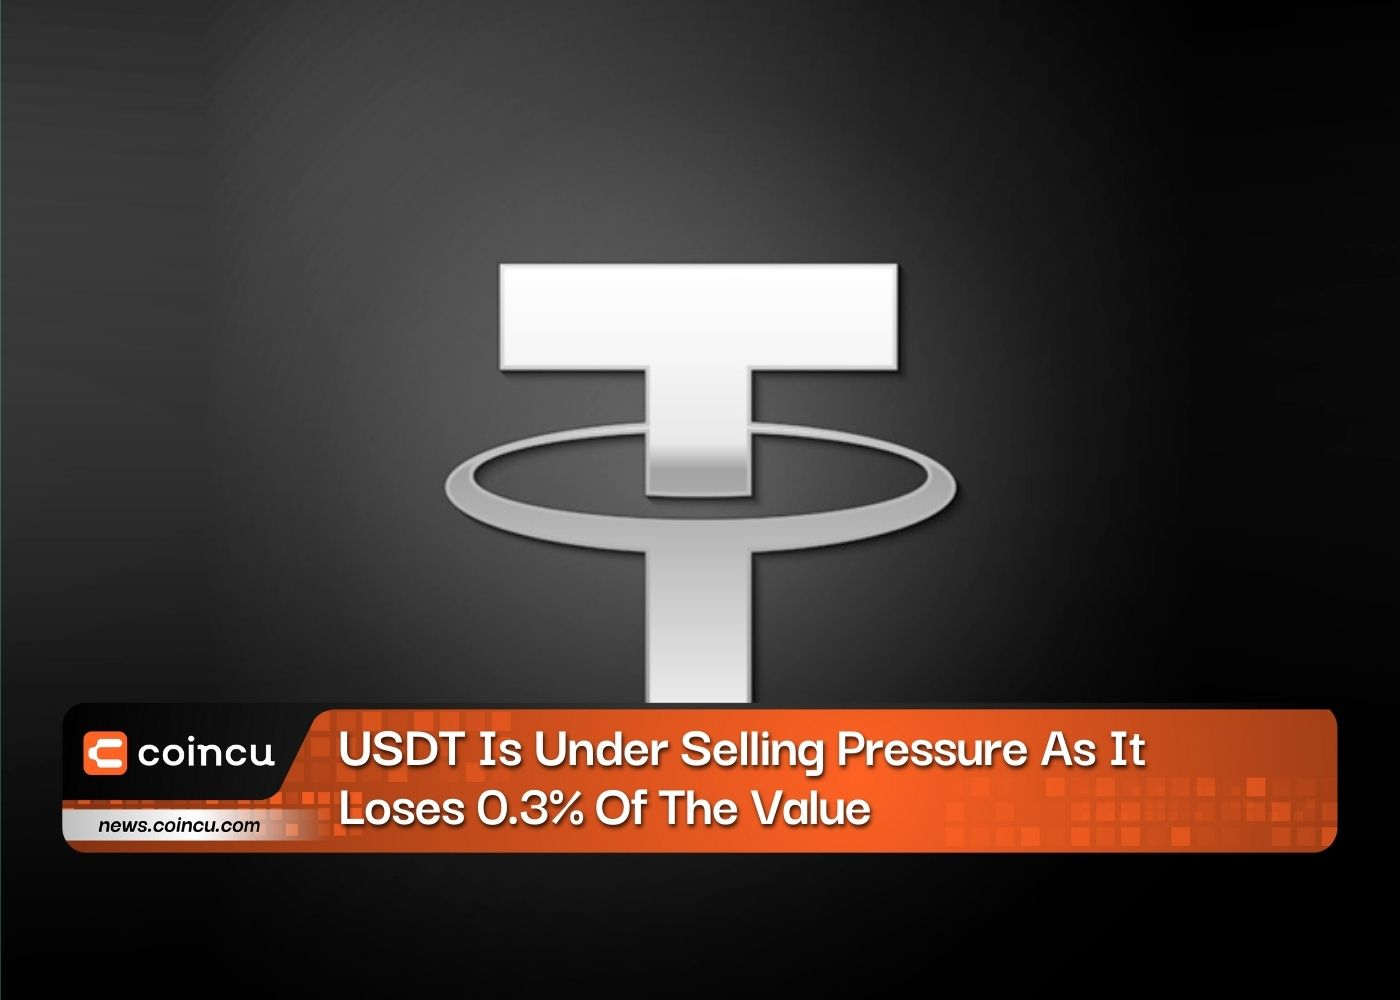 USDT Is Under Selling Pressure As It Loses 0.3% Of The Value